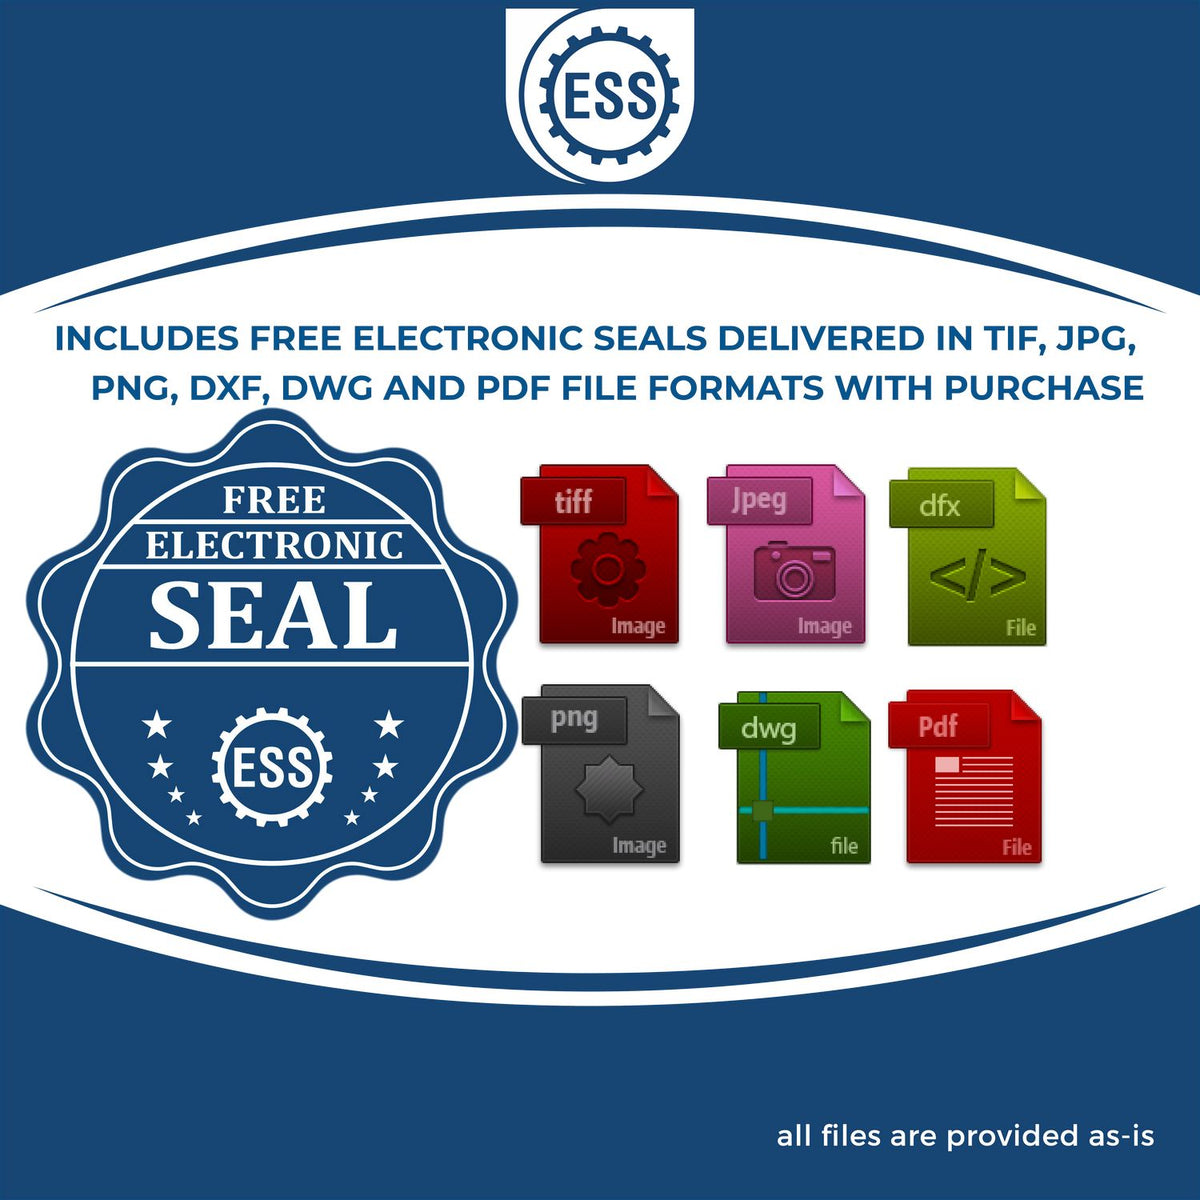 An infographic for the free electronic seal for the West Virginia Engineer Desk Seal illustrating the different file type icons such as DXF, DWG, TIF, JPG and PNG.